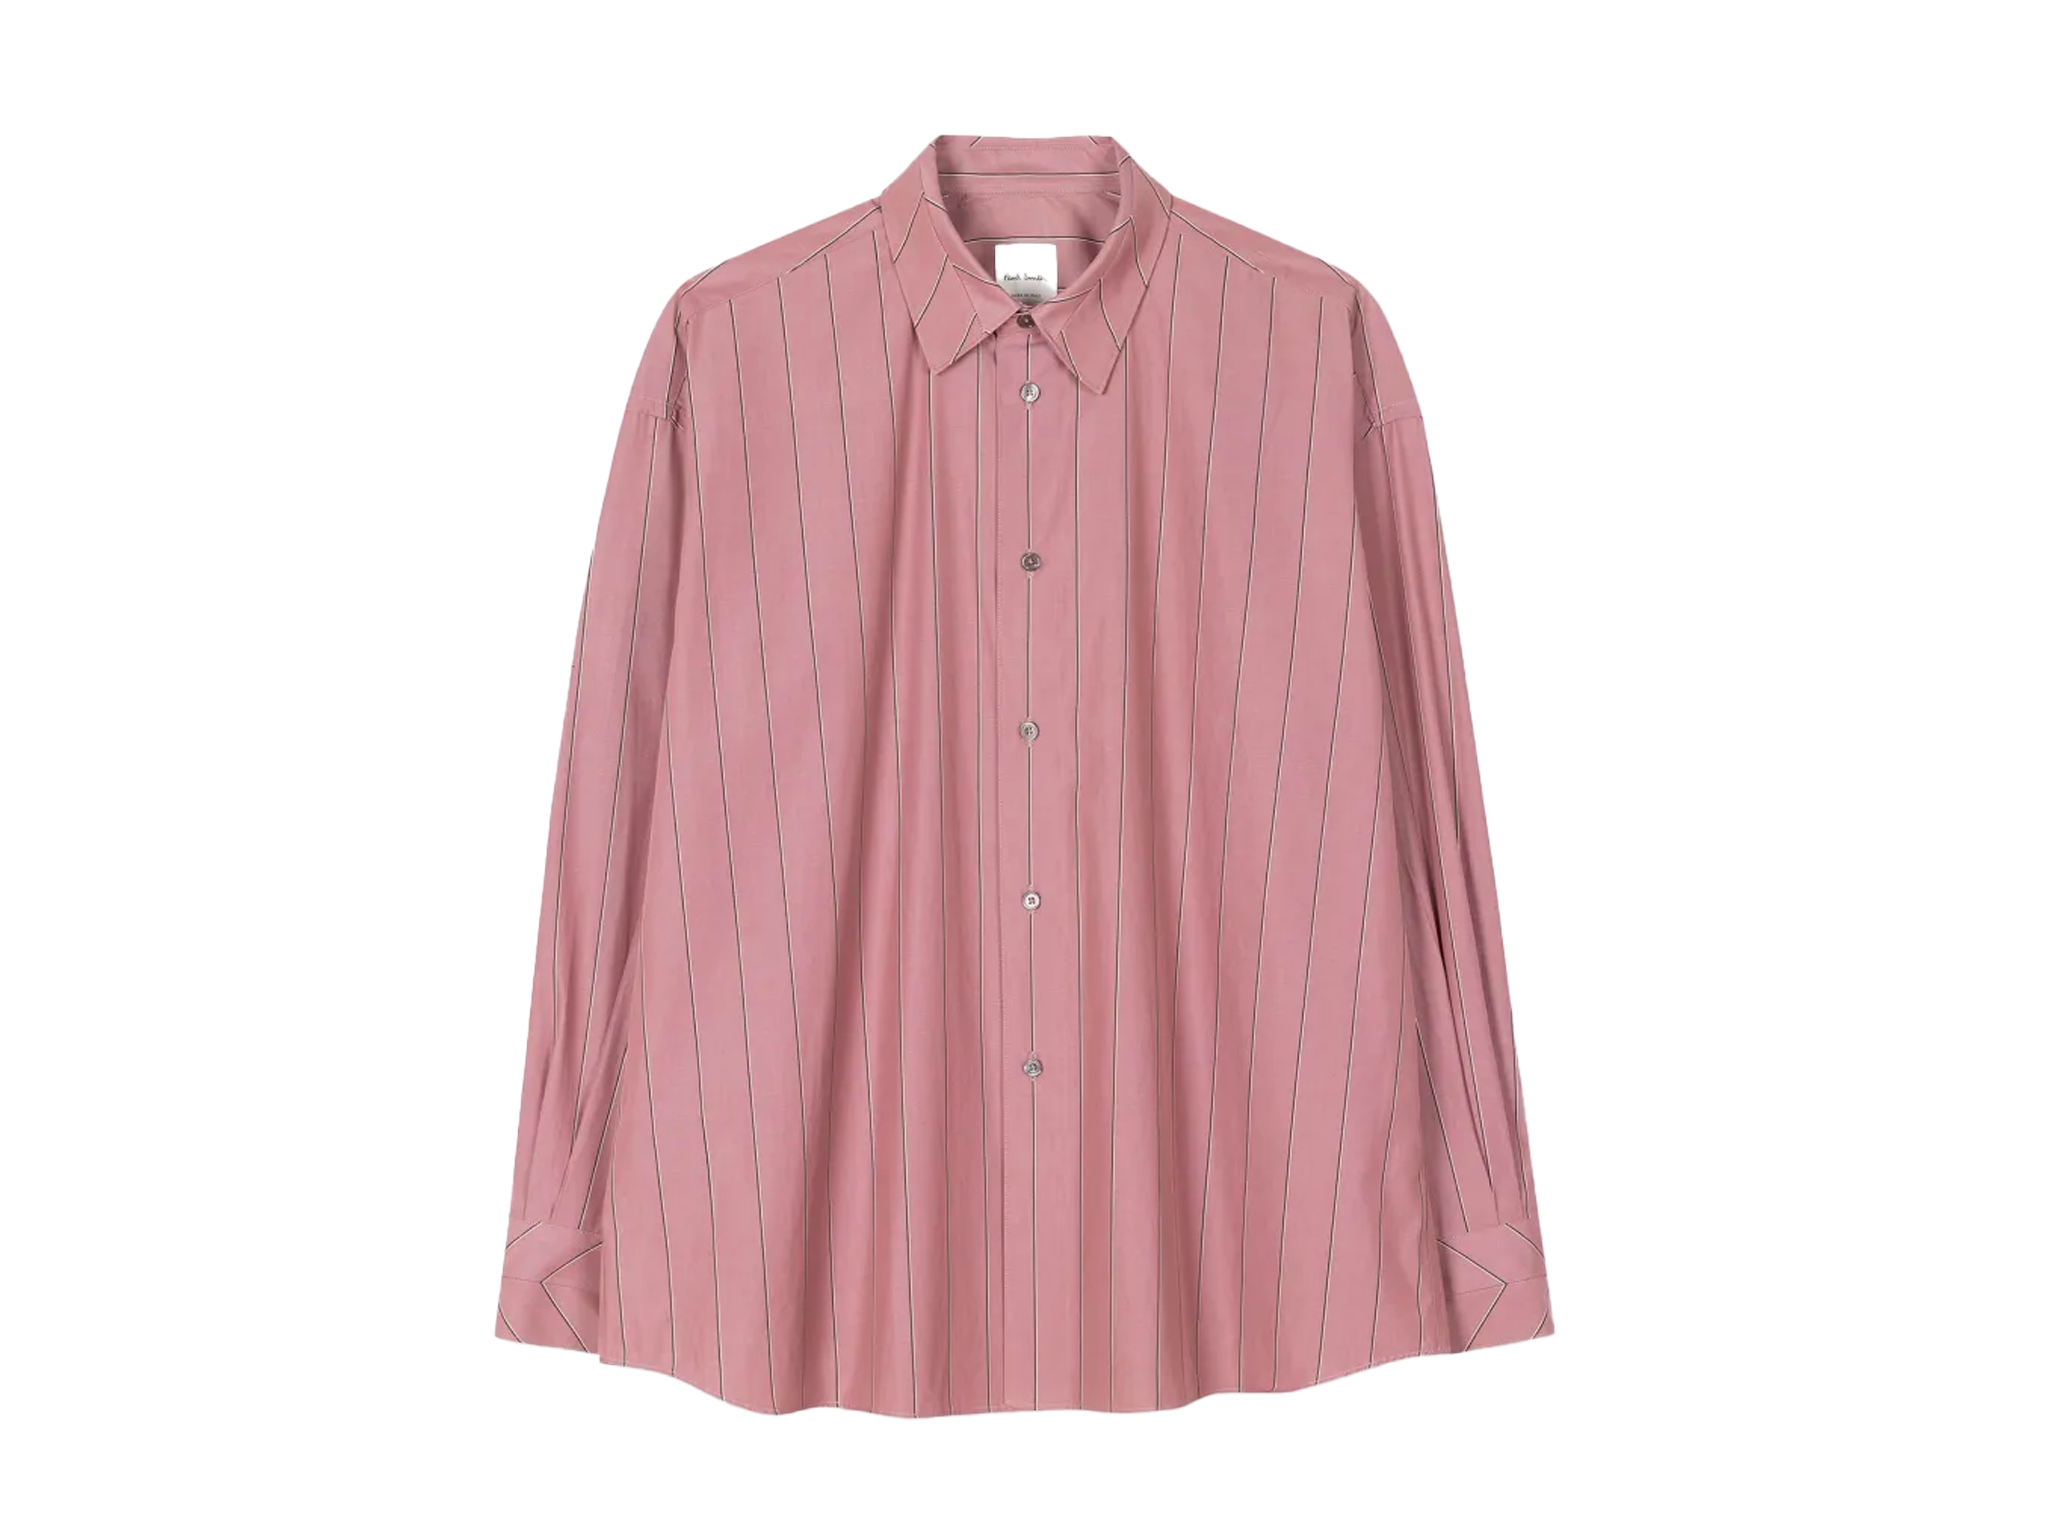 Paul-smith-shirt-indybest